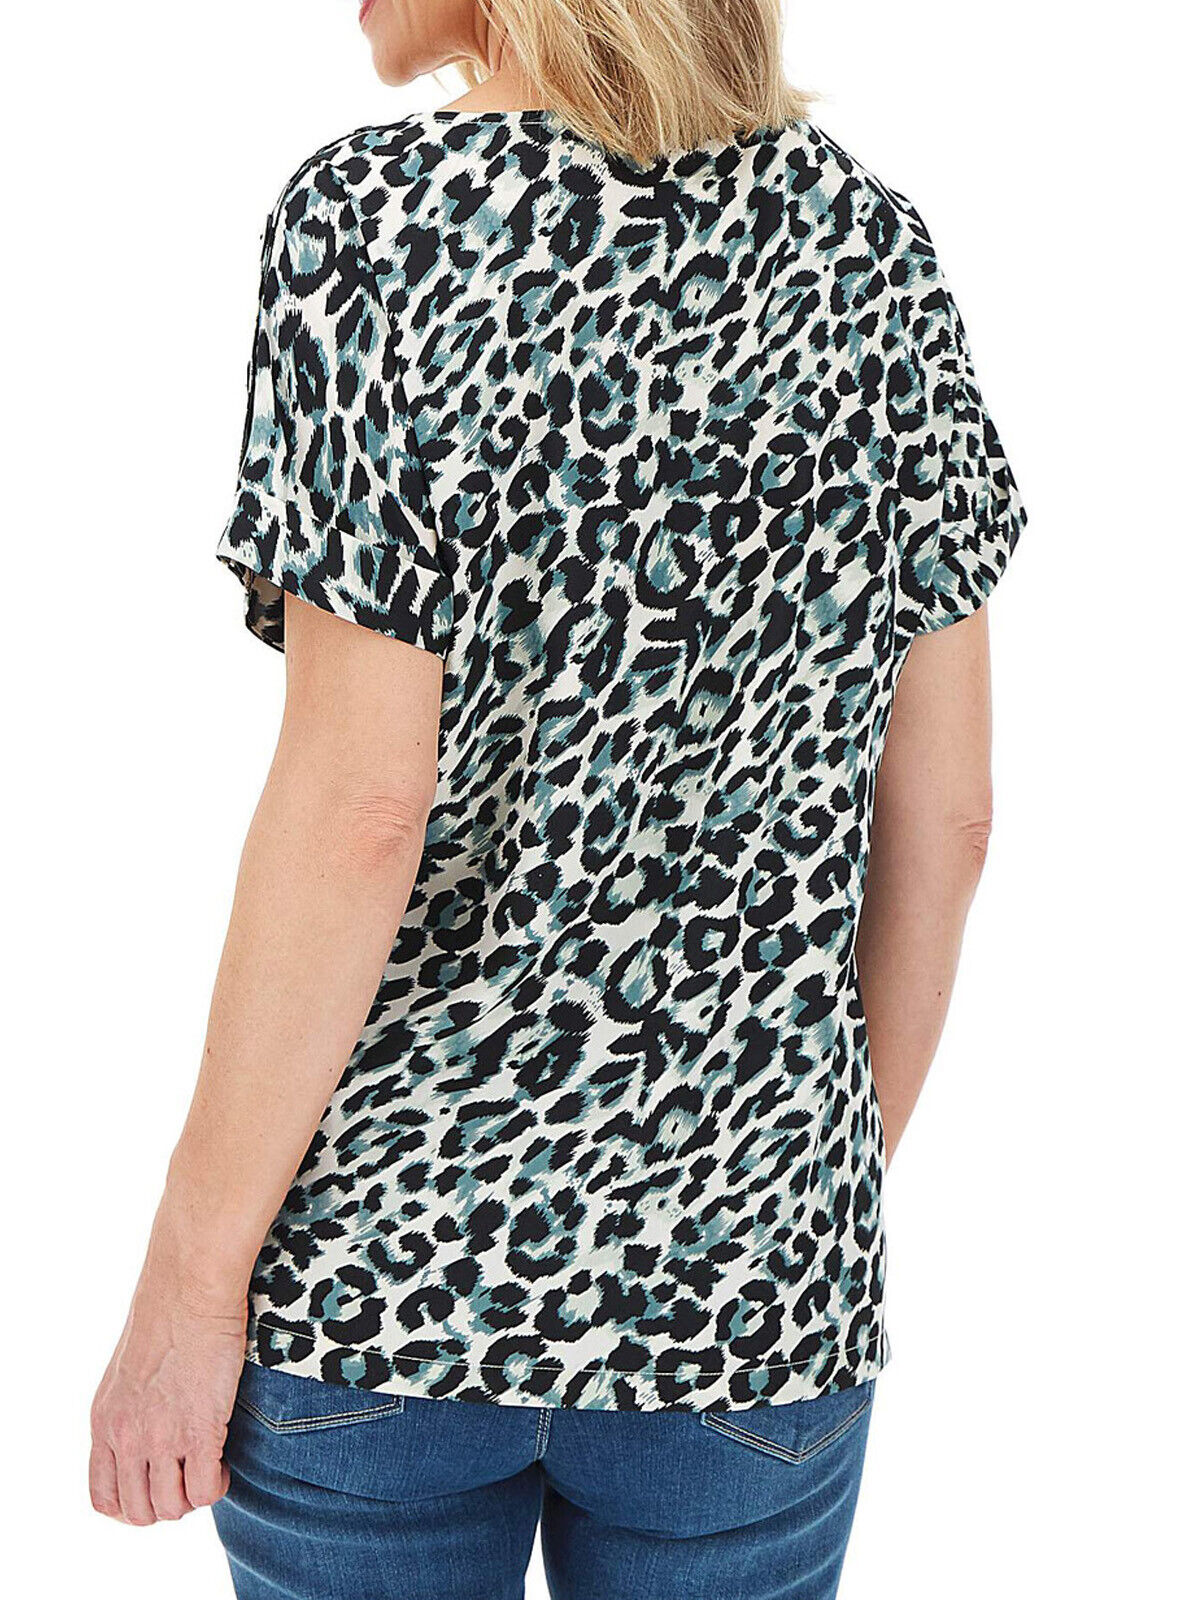 New Capsule Green Animal Print Button Detail Boxy Top in Size 30 RRP £16